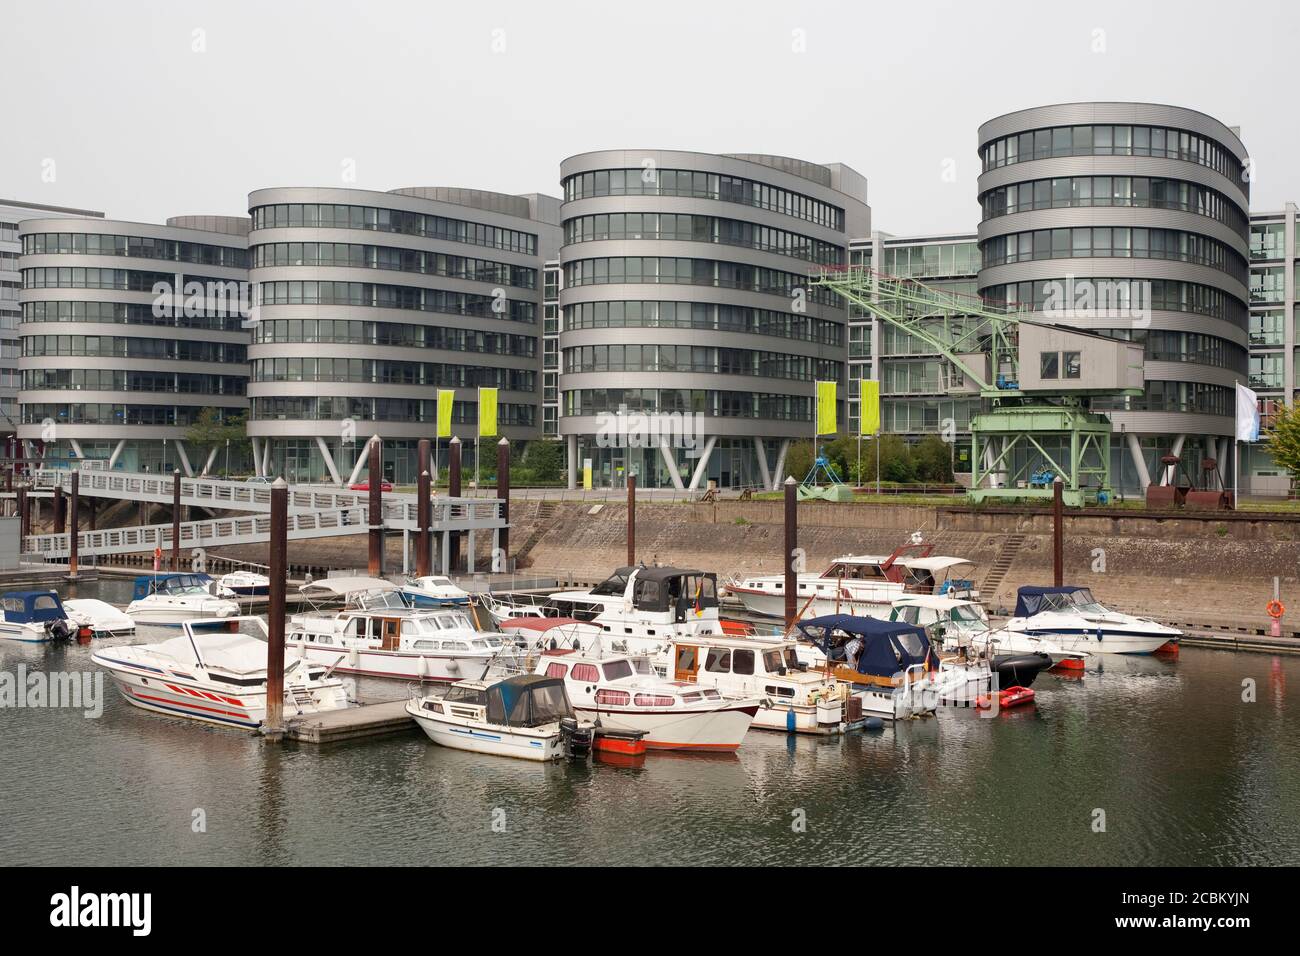 Residential Section, Marina, Duisburg Port Harbour, Rhine River, Ruhr Region, Germany Stock Photo